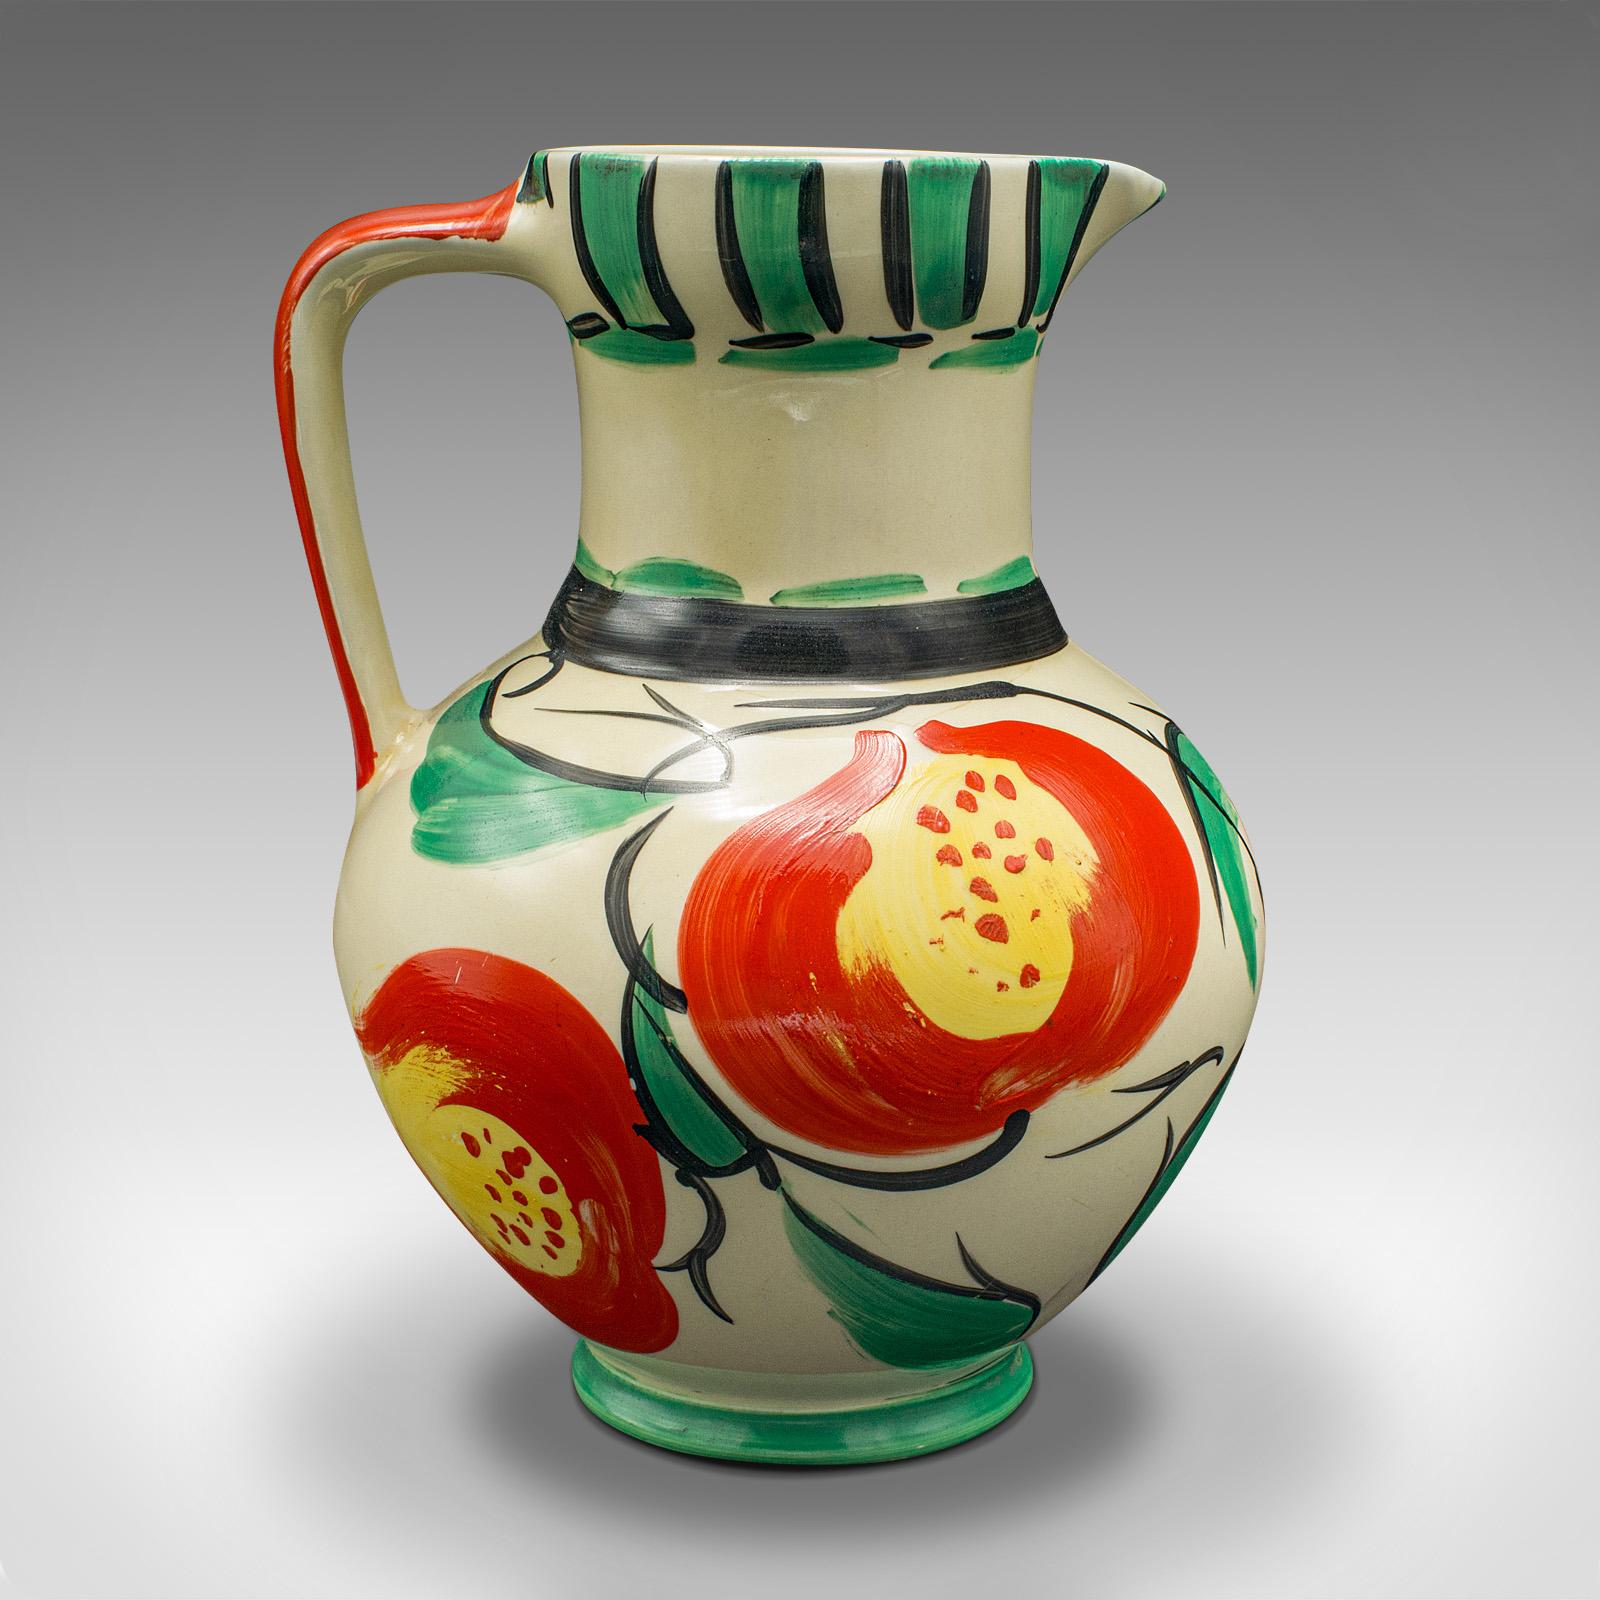 This is a vintage decorative jug. An English, ceramic creamer or pourer, dating to the early 20th century, circa 1930.

Temptingly cheerful colour to this sweet ceramic jug
Displays a desirable aged patina and in good order
Light yellow ceramic